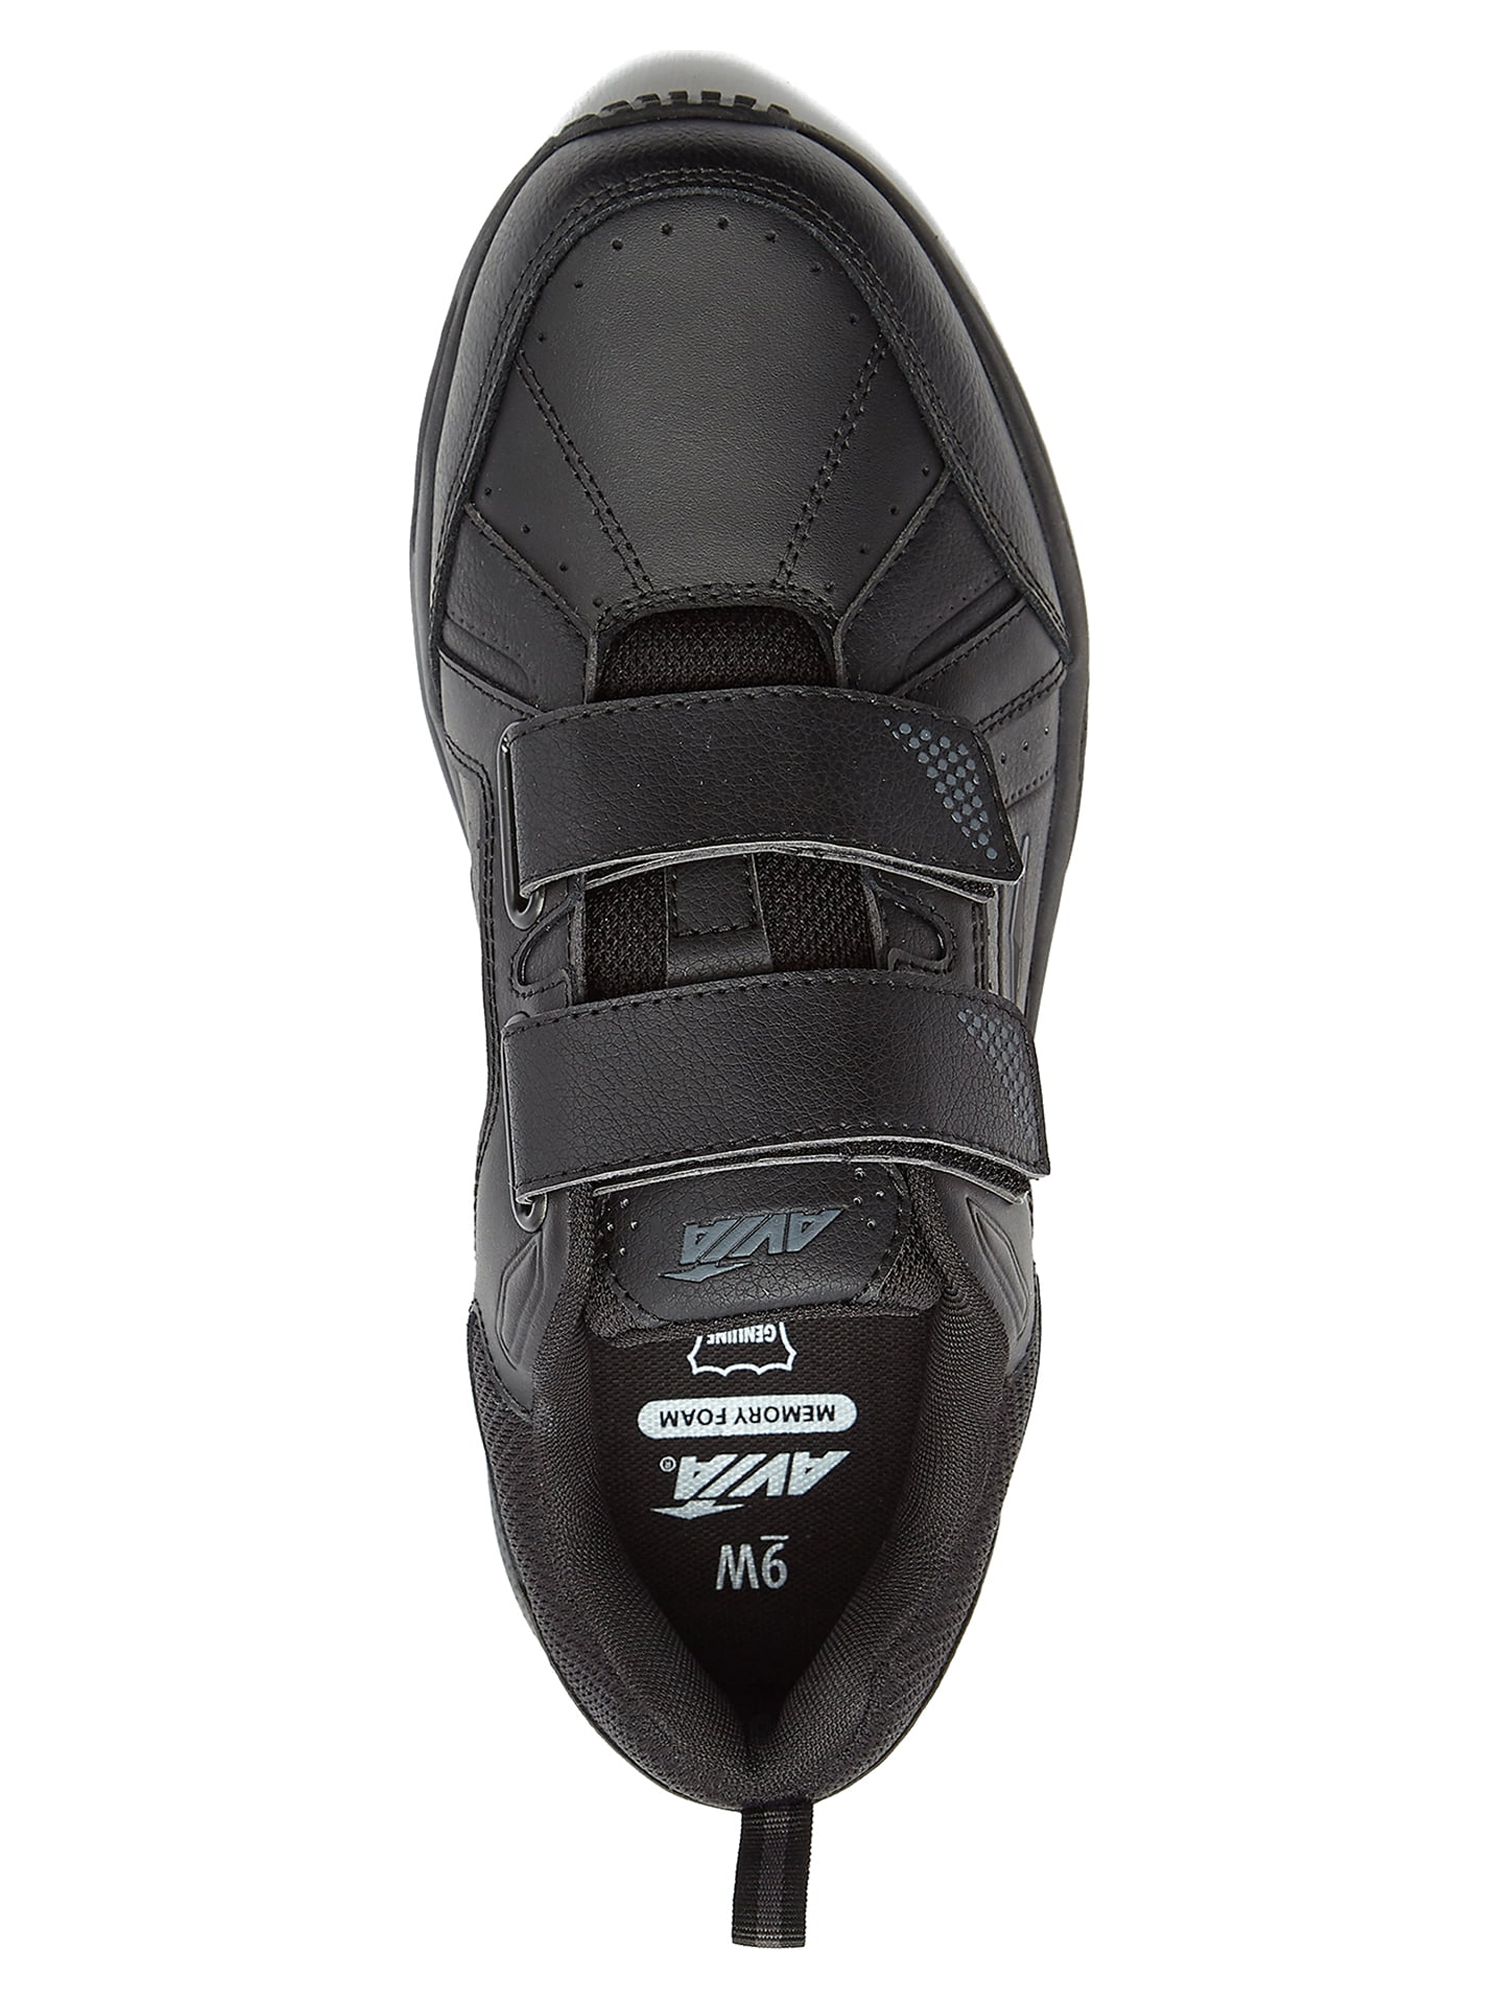 Avia Men's Quickstep Strap Wide Width Walking Shoes - image 3 of 5